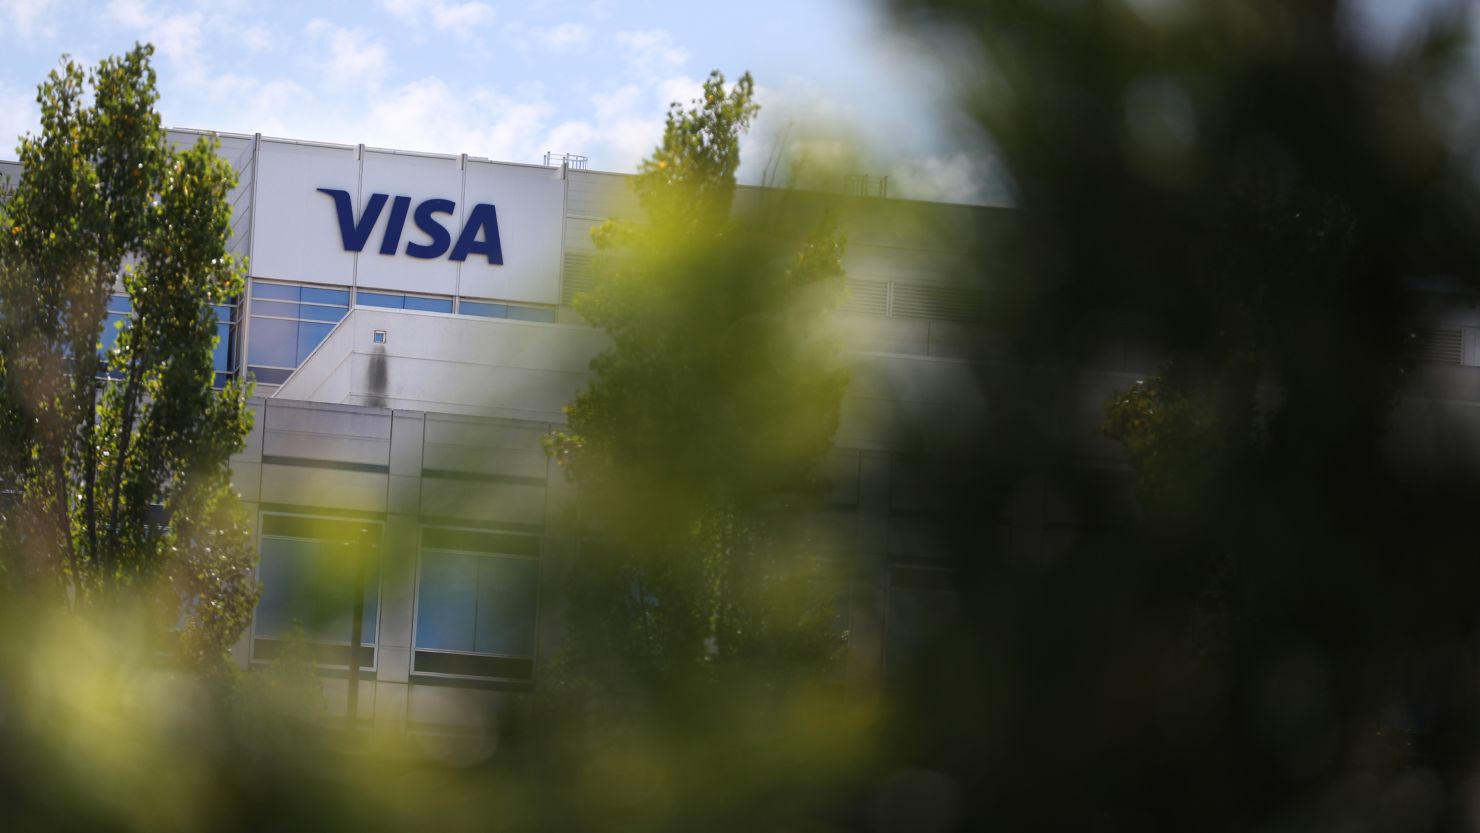 FOSTER CITY, CALIFORNIA - AUGUST 28: A view of Visa headquarters on August 28, 2019 in Foster City, California. Visa is the second-largest card payment organization in the world.  (Photo by Justin Sullivan/Getty Images)